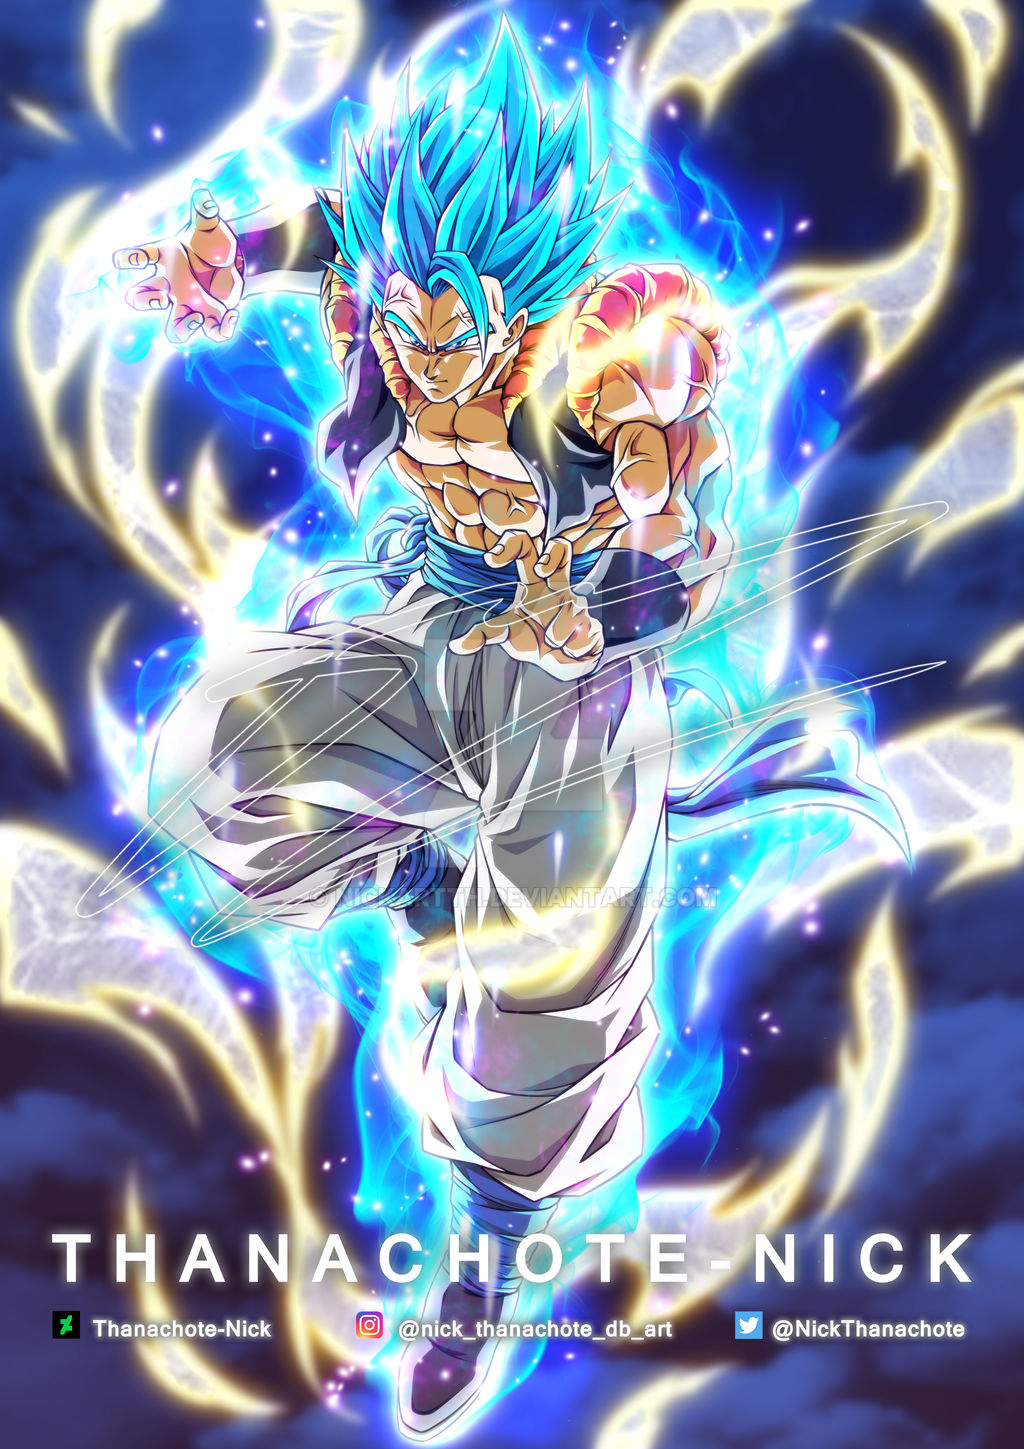 The recent SDBH poster shows Gogeta Blue Evolution. There's a